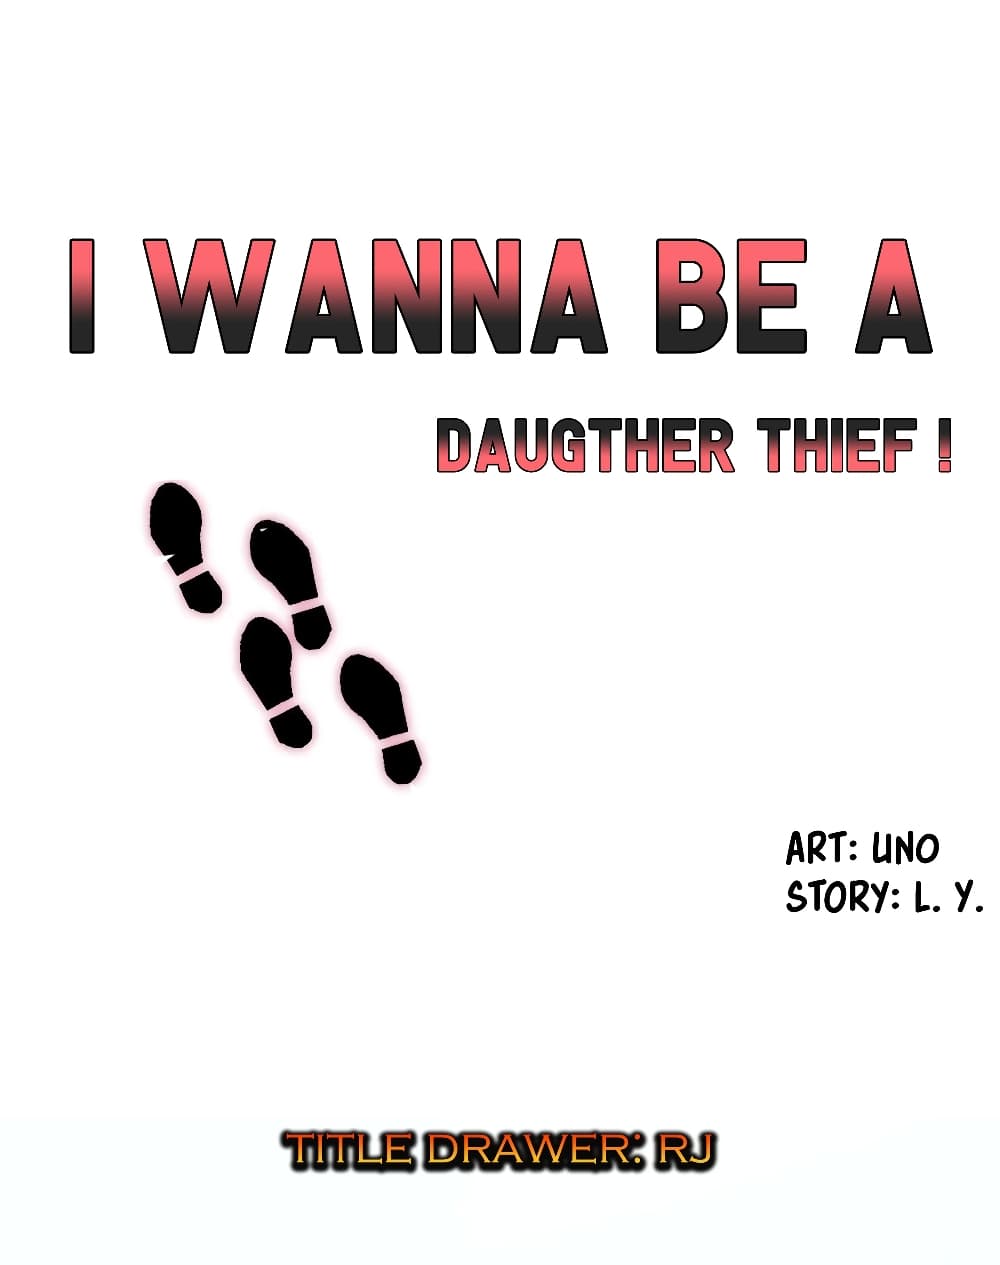 I Wanna Be a Daughter Thief 2-2